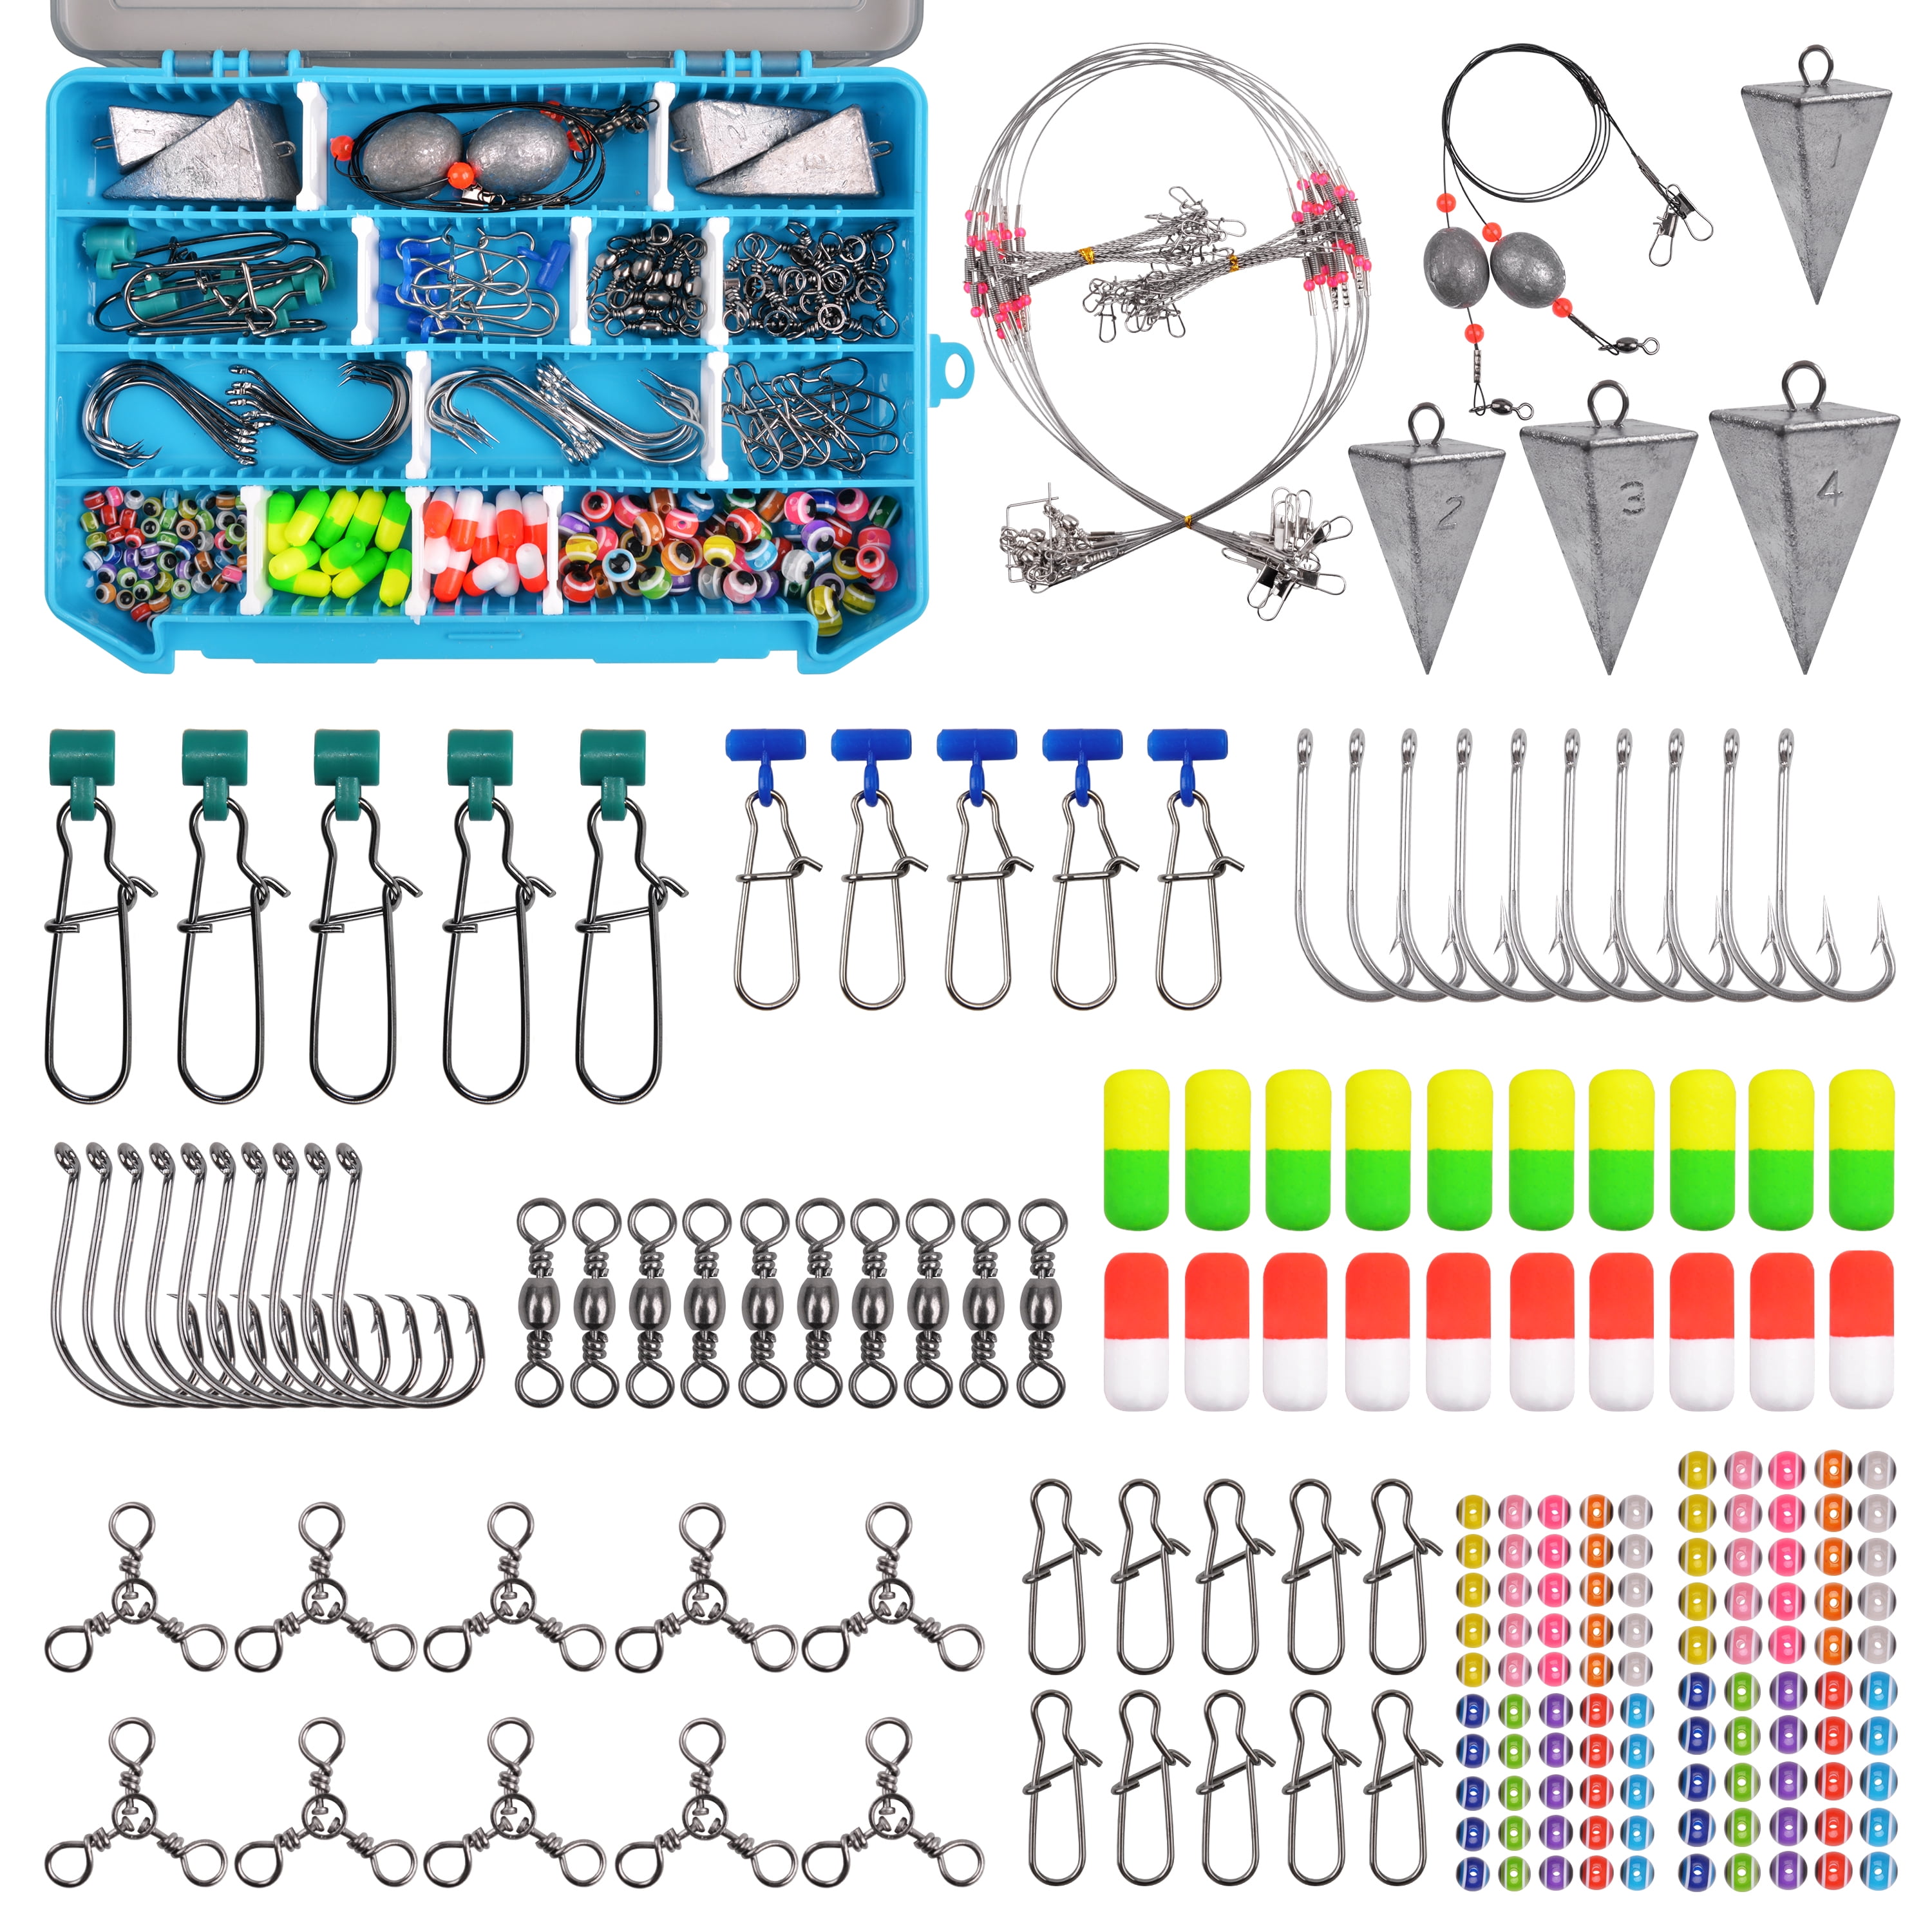  Fishing Accessories Kit Fishing Tackle Box with Tackle  Included, Fishing Hooks, Fishing Weights Sinkers, Fishing Swivels Snaps,  Beads, Fishing Gear Set Equipment for Bass Trout Fishing Gifts for Men 